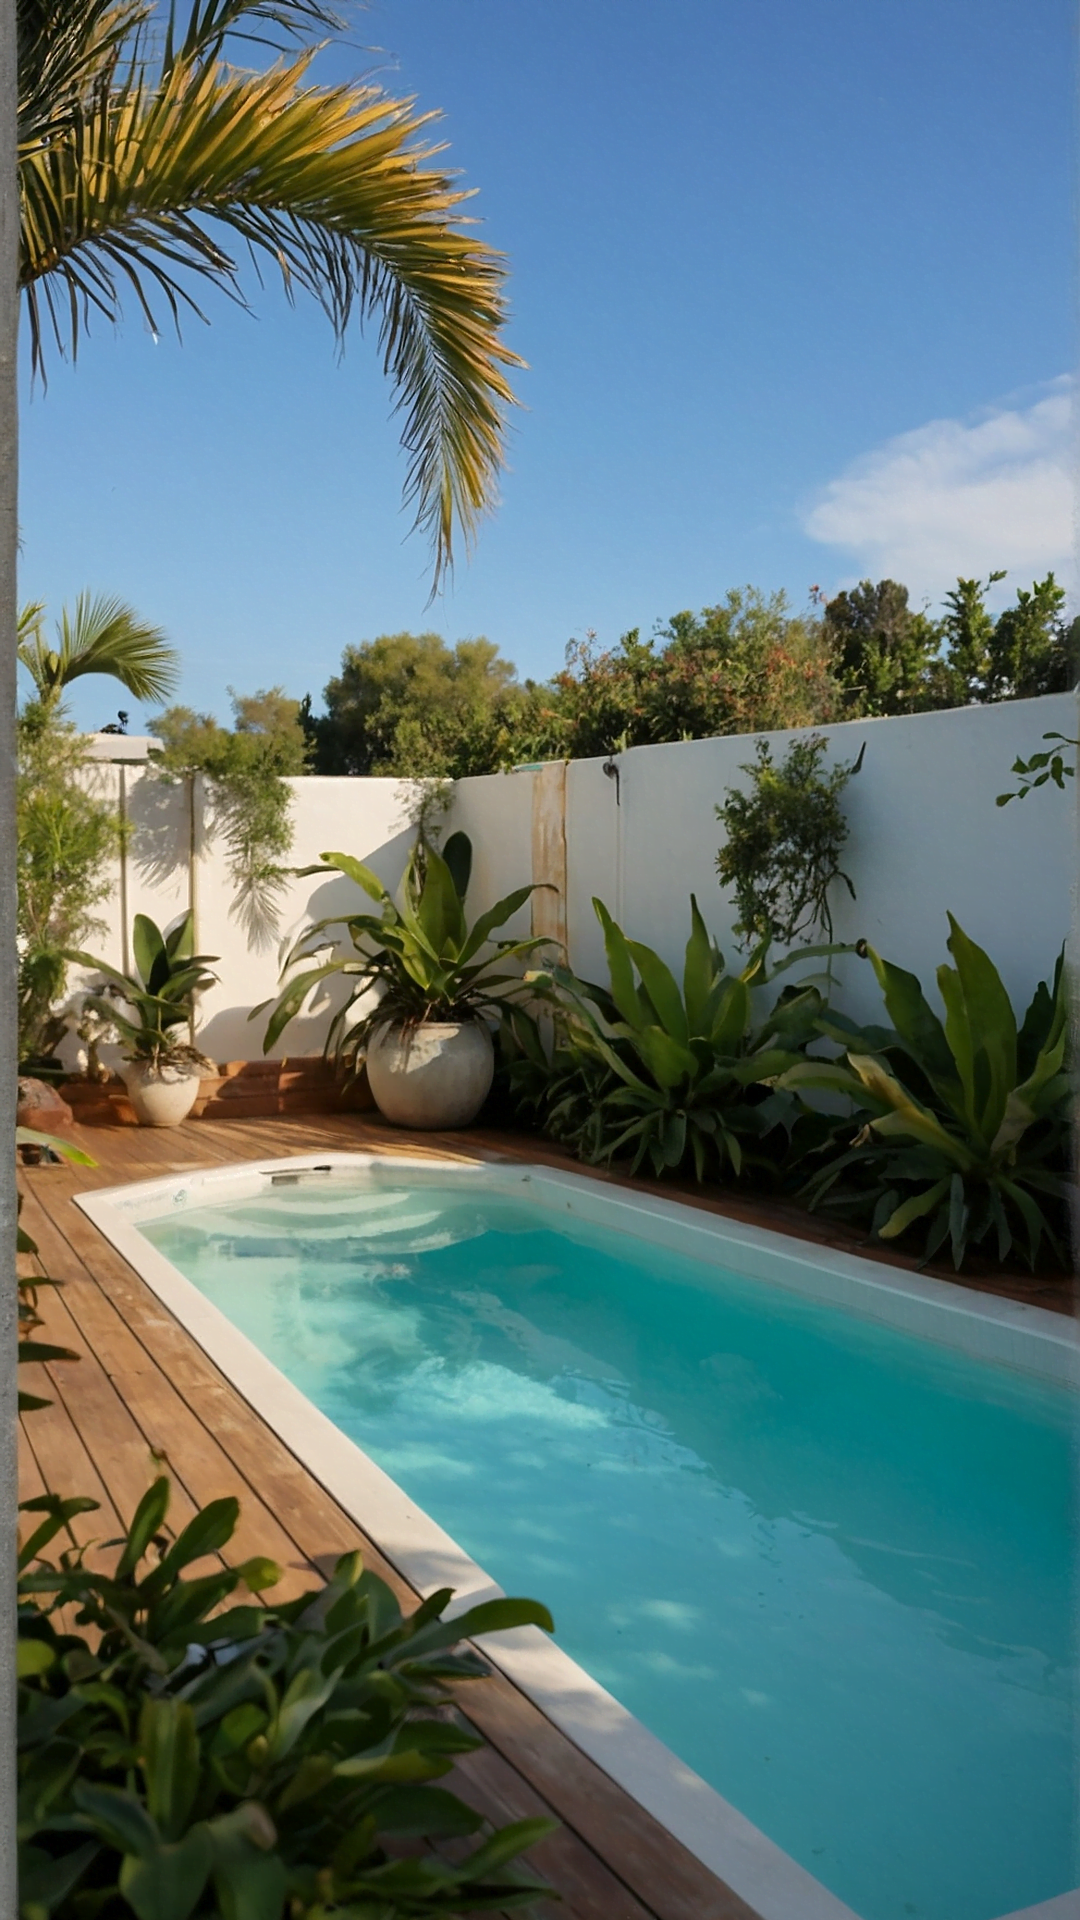 The Art of Pool Landscaping with Foliage